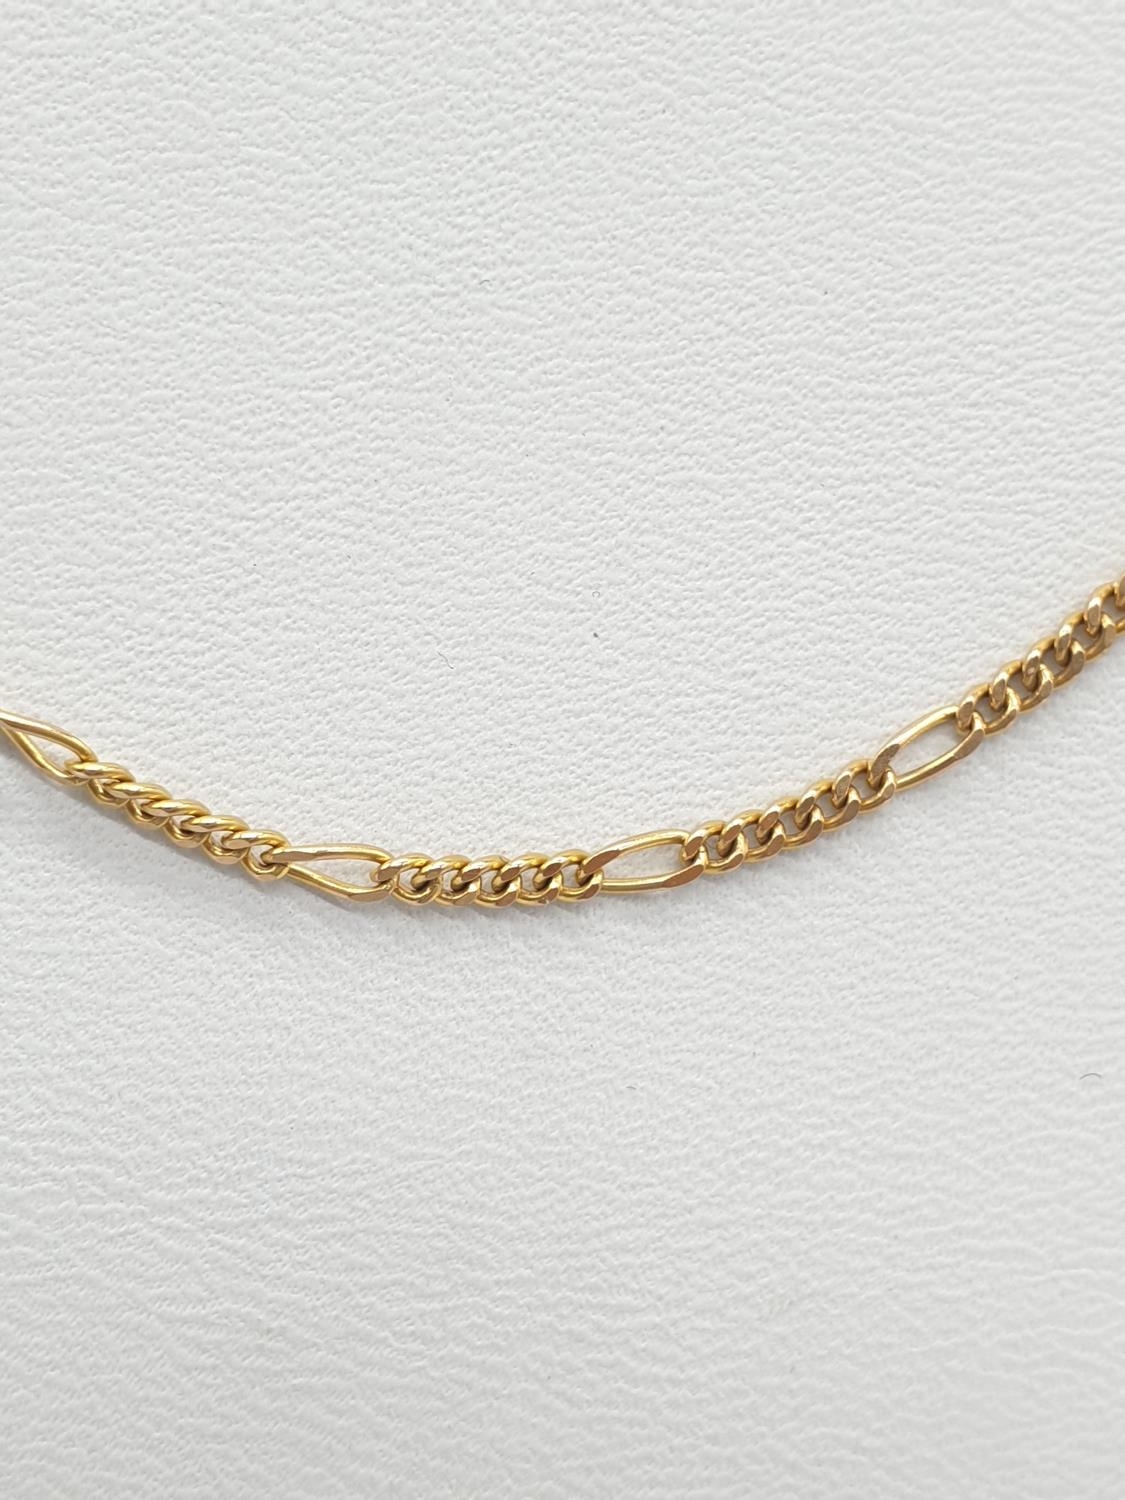 40cm 9ct gold neck chain weight 3gm. - Image 2 of 3